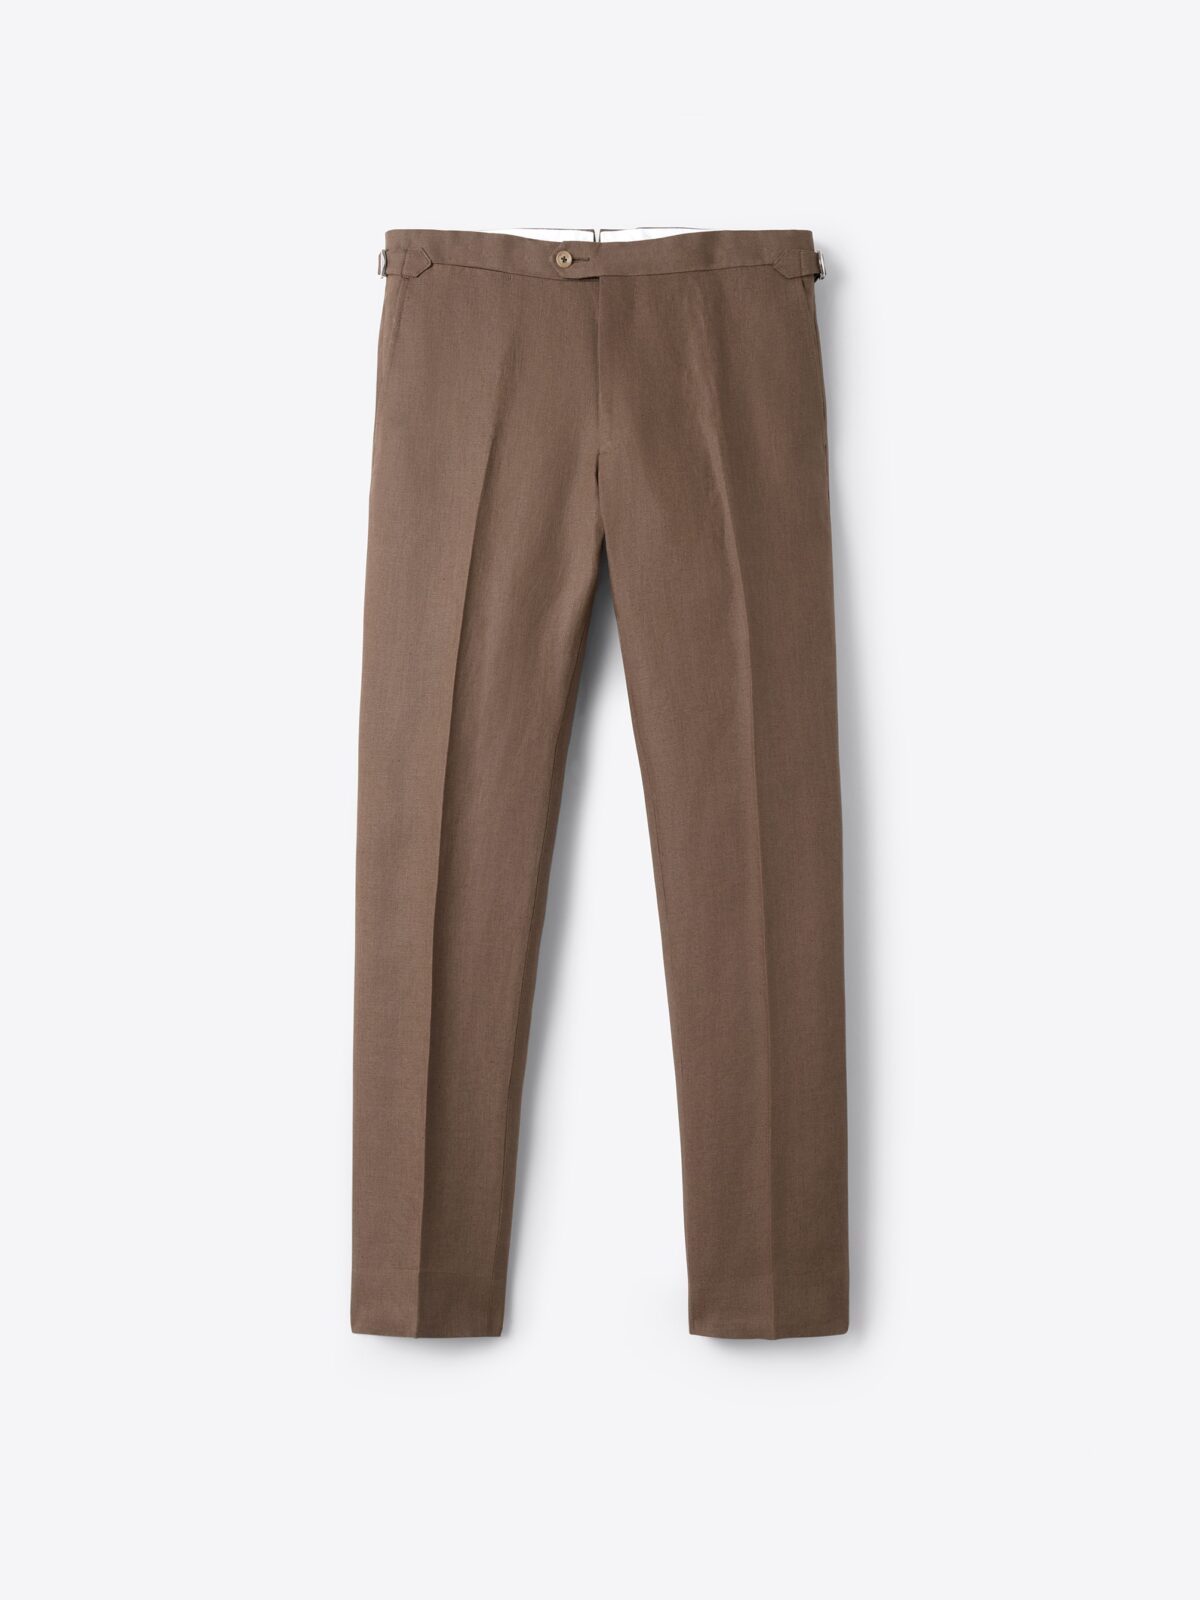 New Stylish 100% Linen Ankle-length Casual Quality Brand Pants